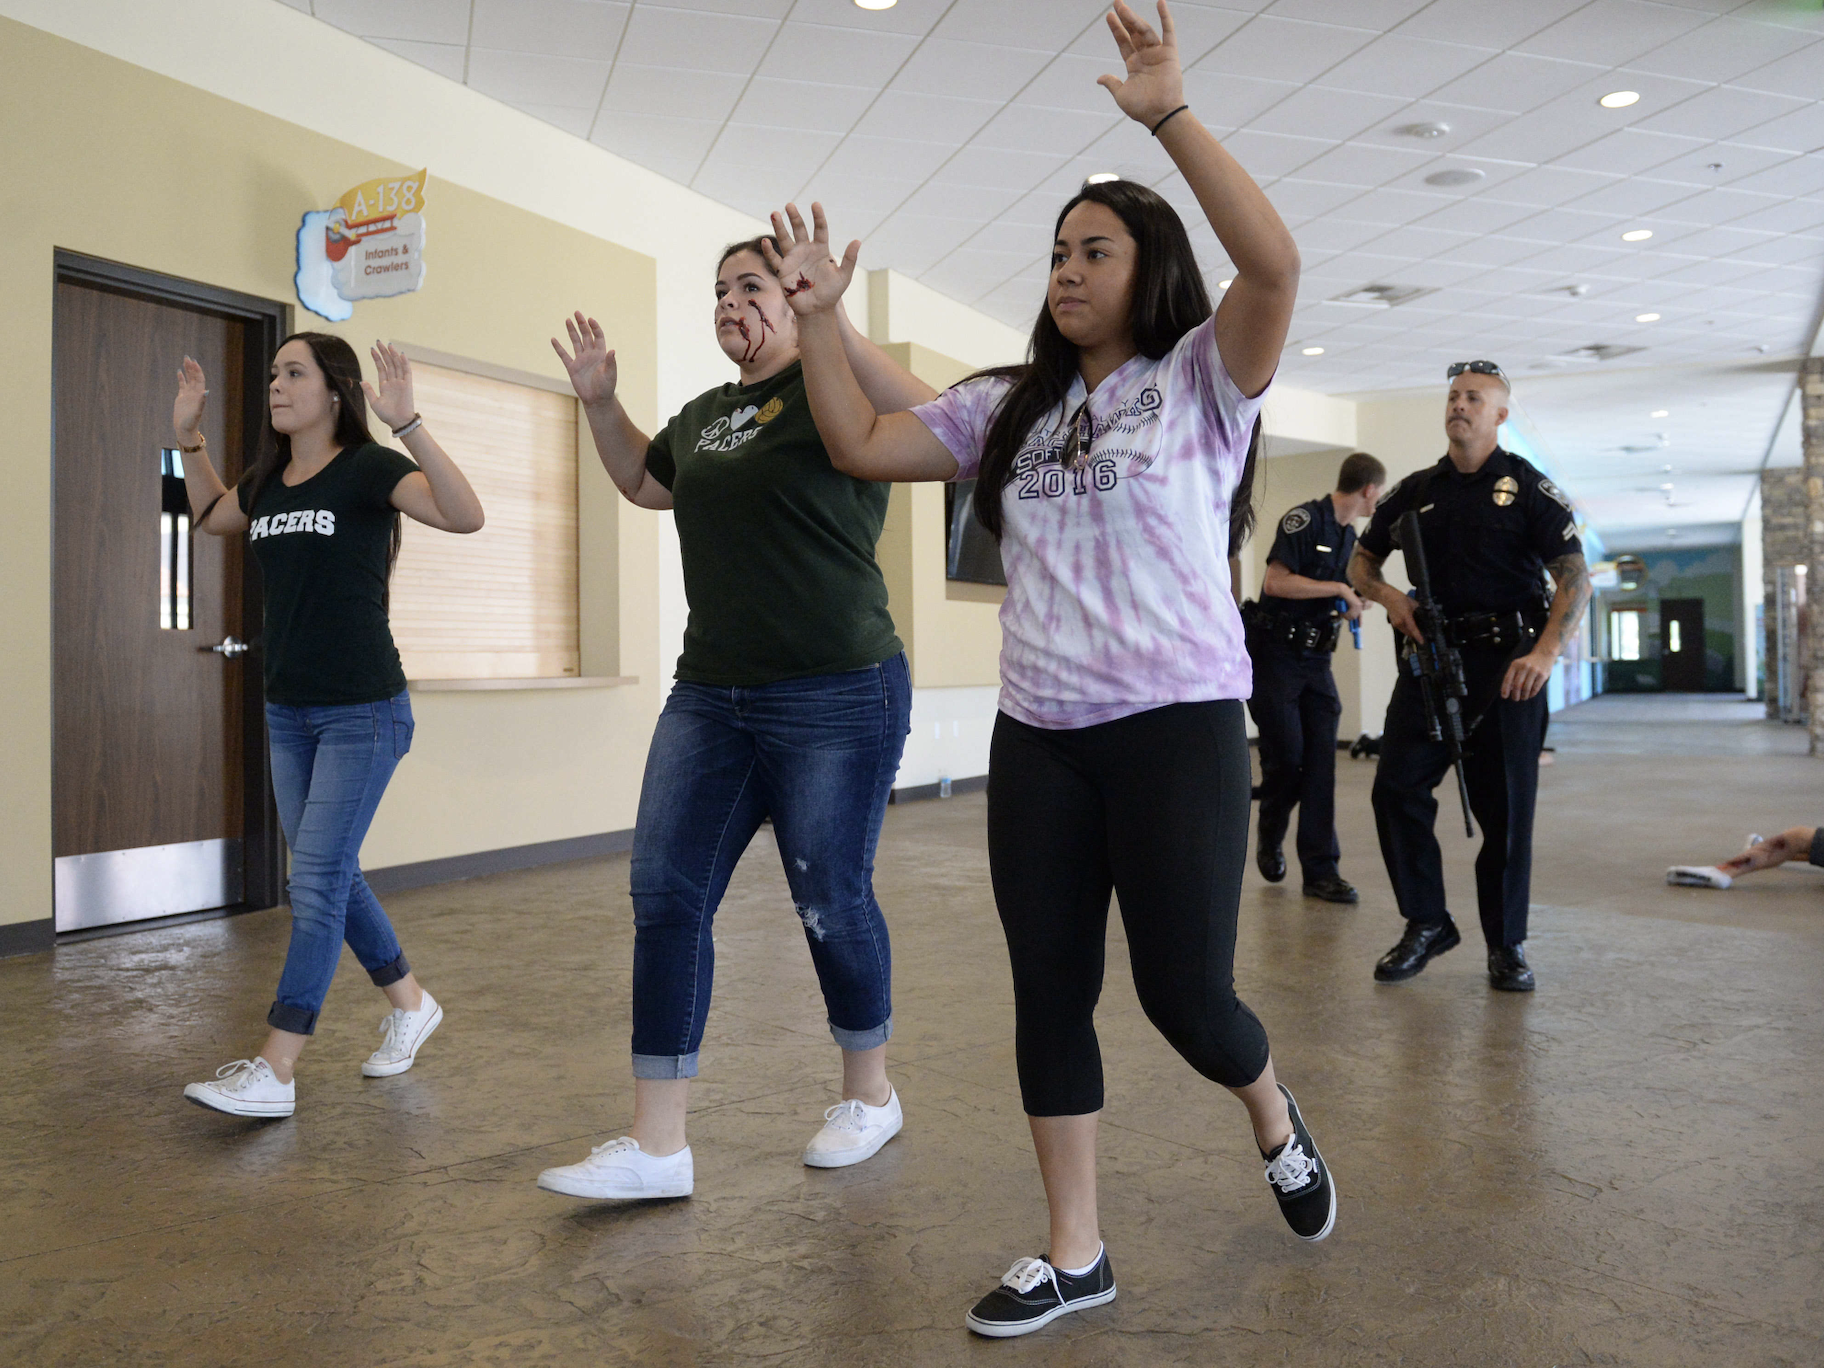 Three people walk with their hands up, followed by two police officers in a school hallway